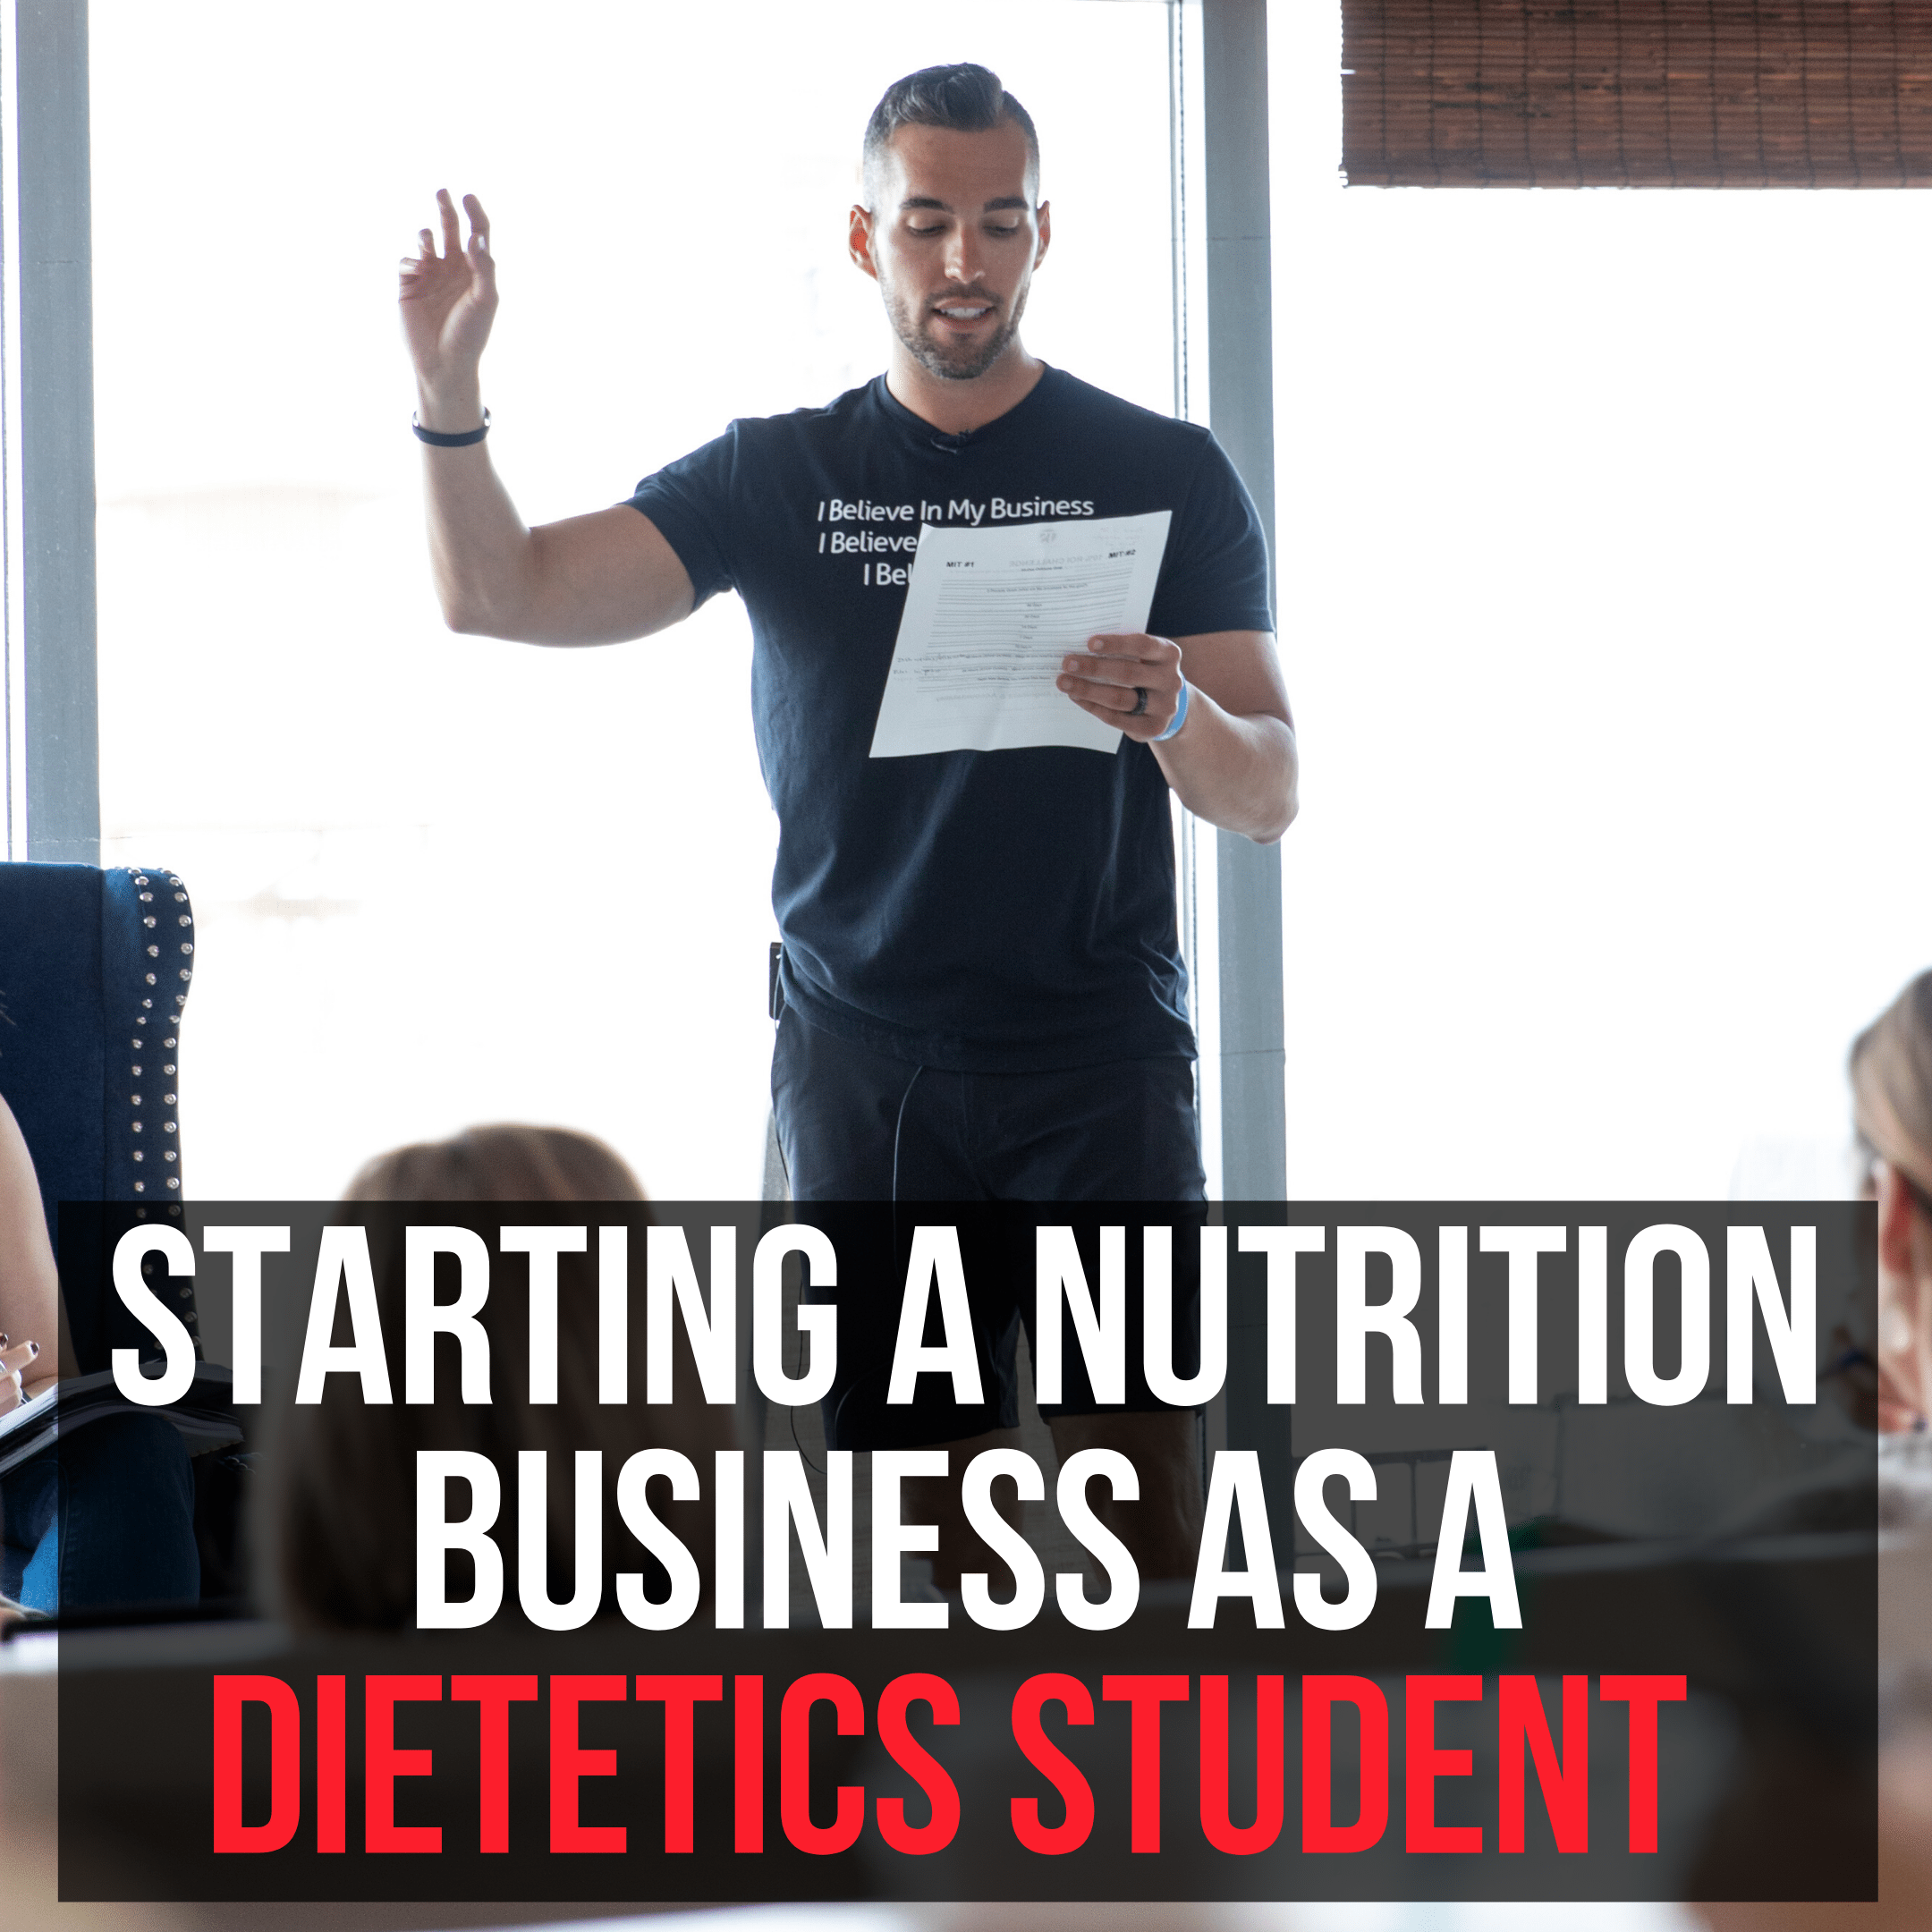 Starting A Nutrition Business As A Dietetics Student